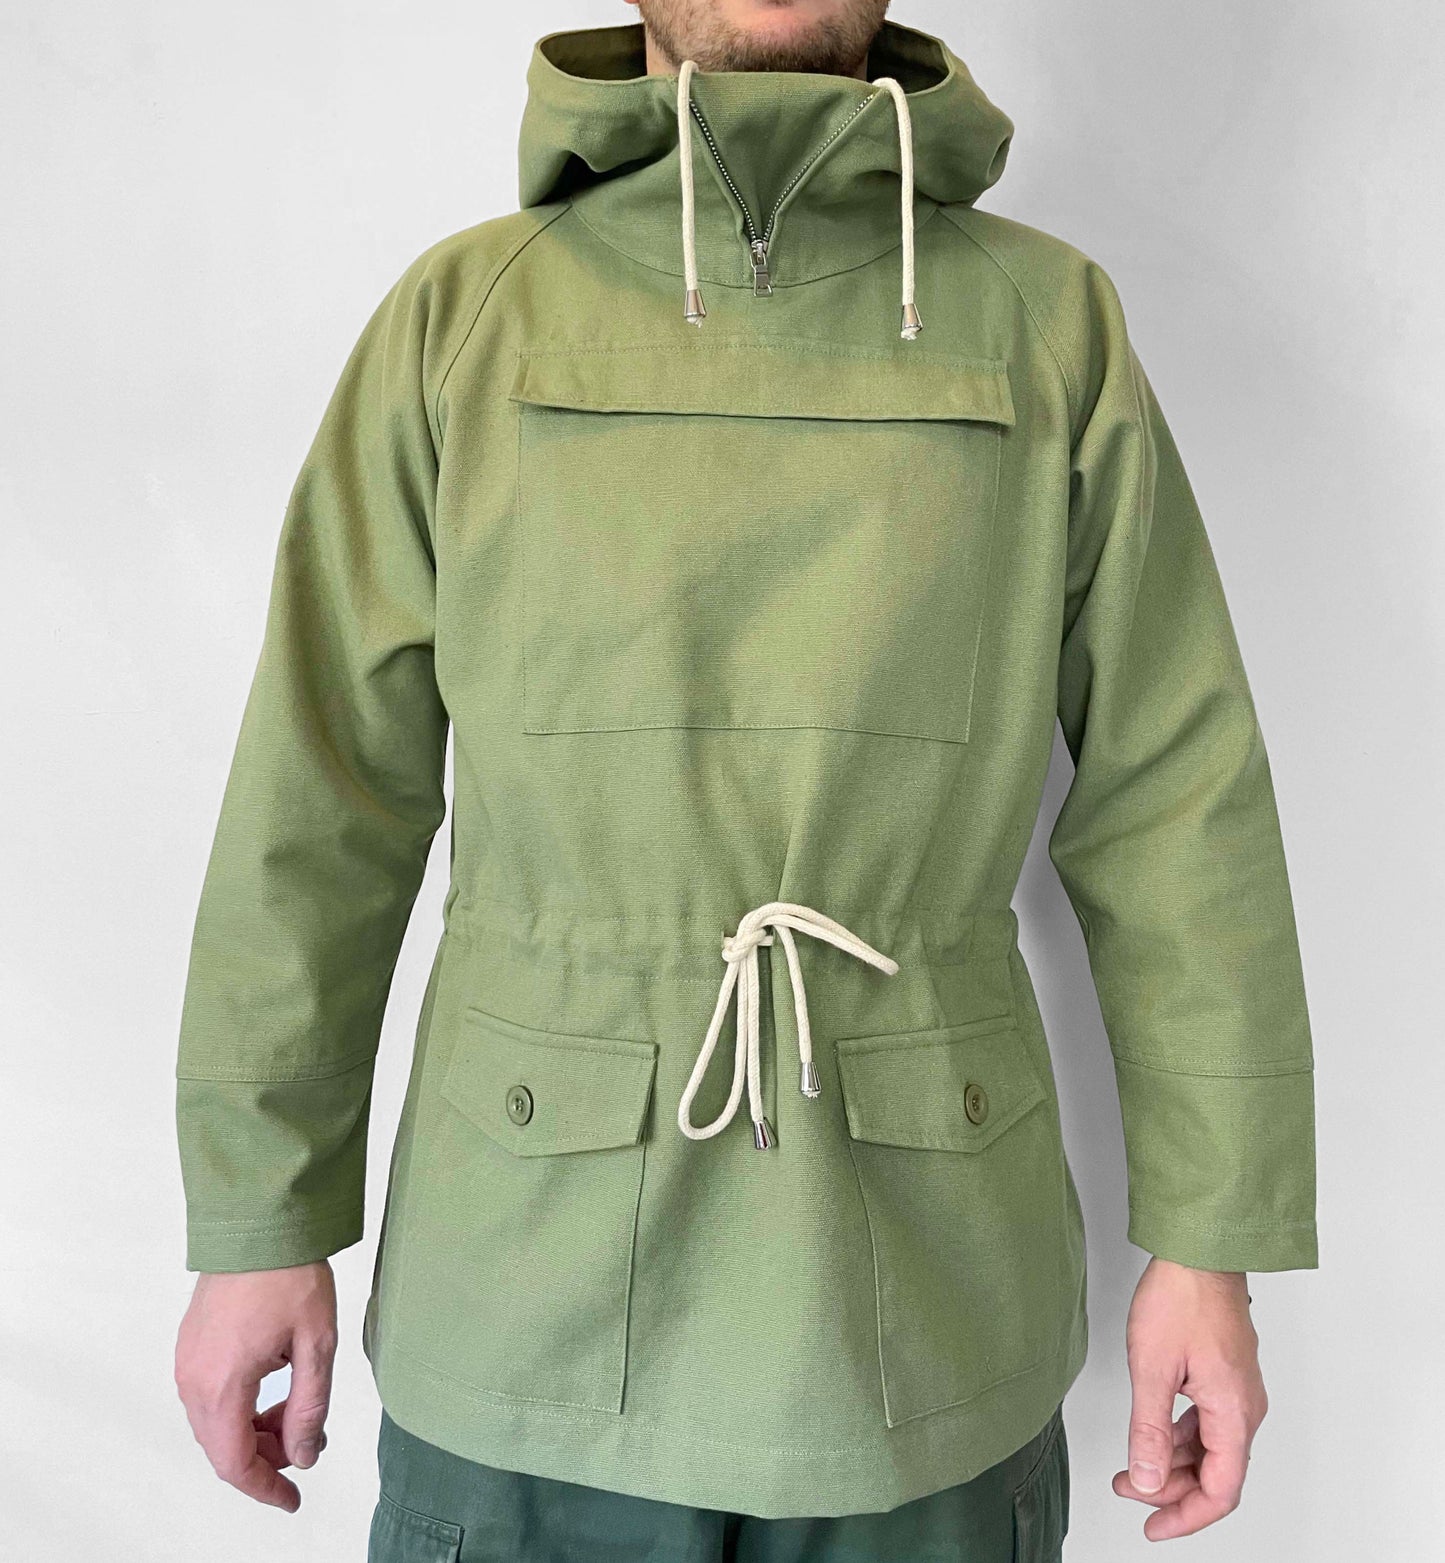 Cadet Smock 1960s Style OG Cotton Canvas Army Green